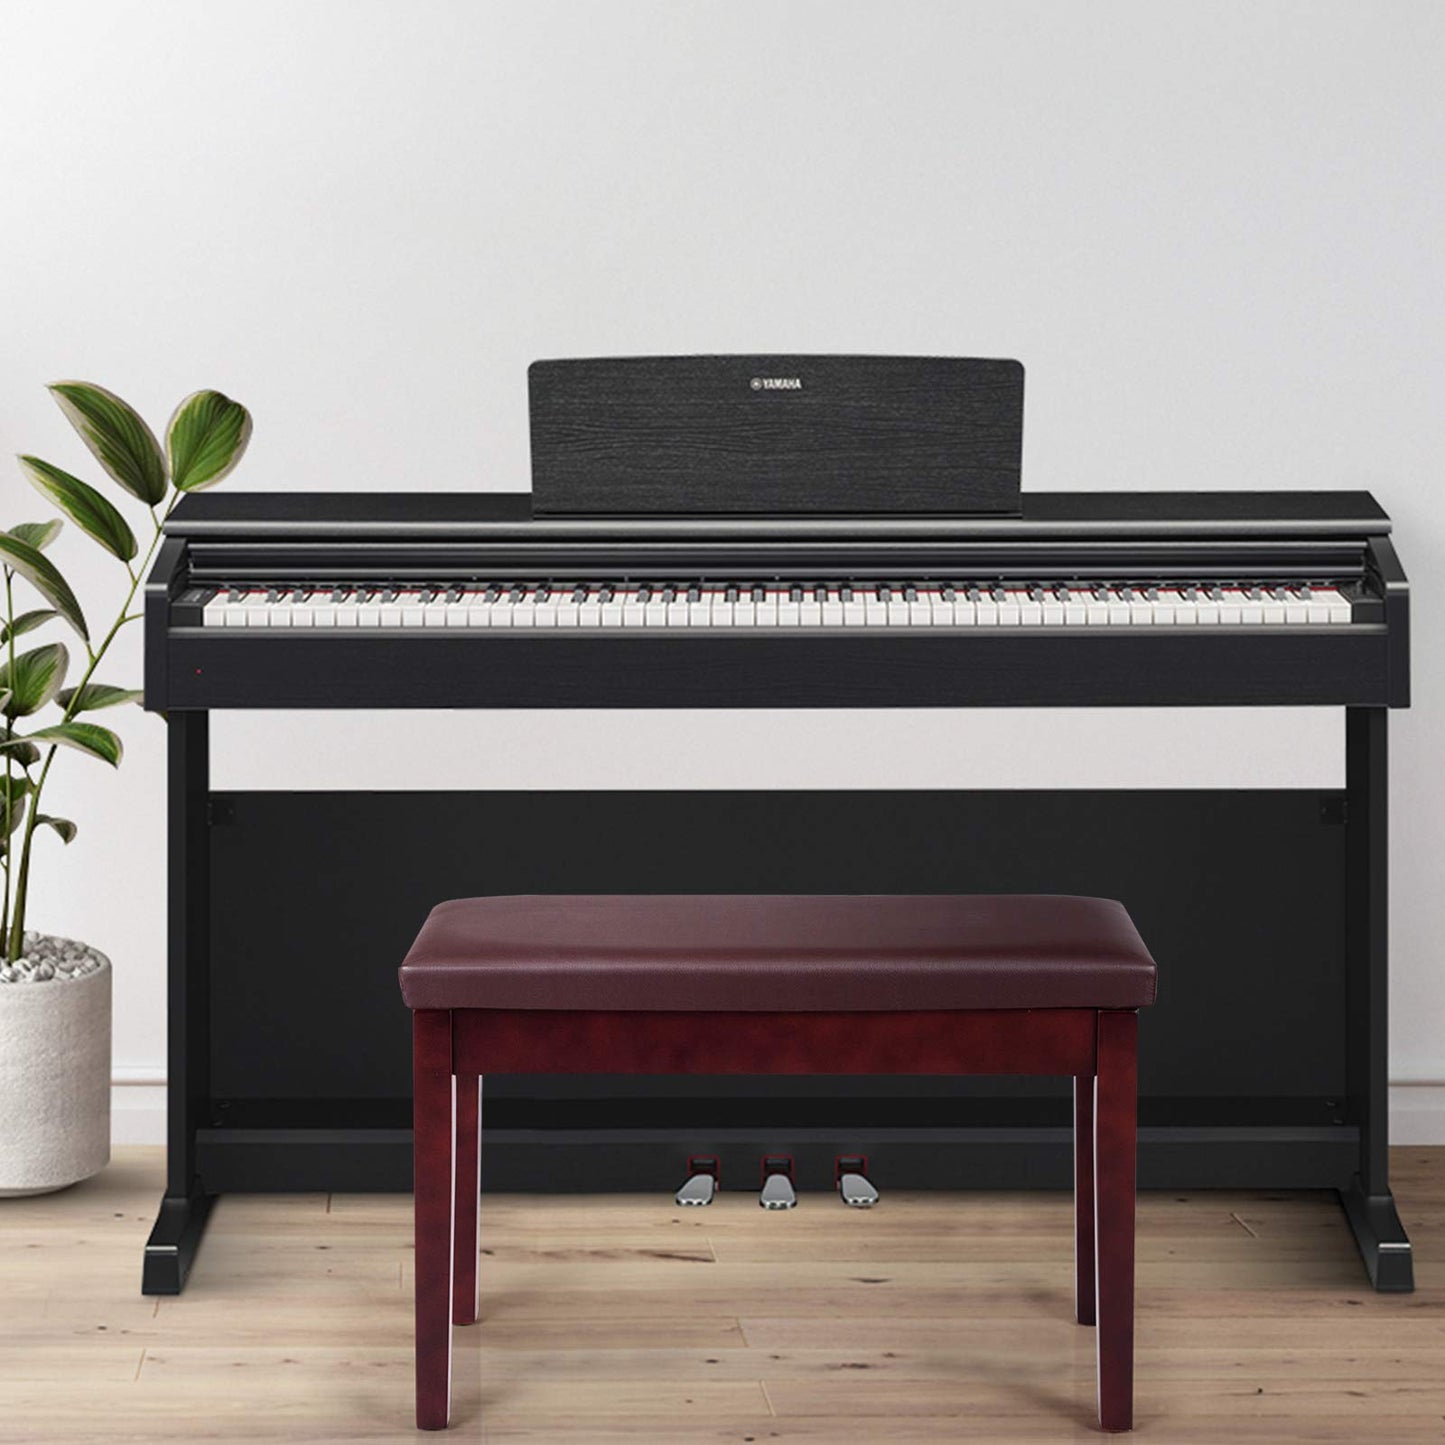 Giantex Piano Bench W/Padded Cushion and Music Storage, Comfortable Double Duet Seat, Wooden Legs, Perfect for Professional Or Home Use PU Leather